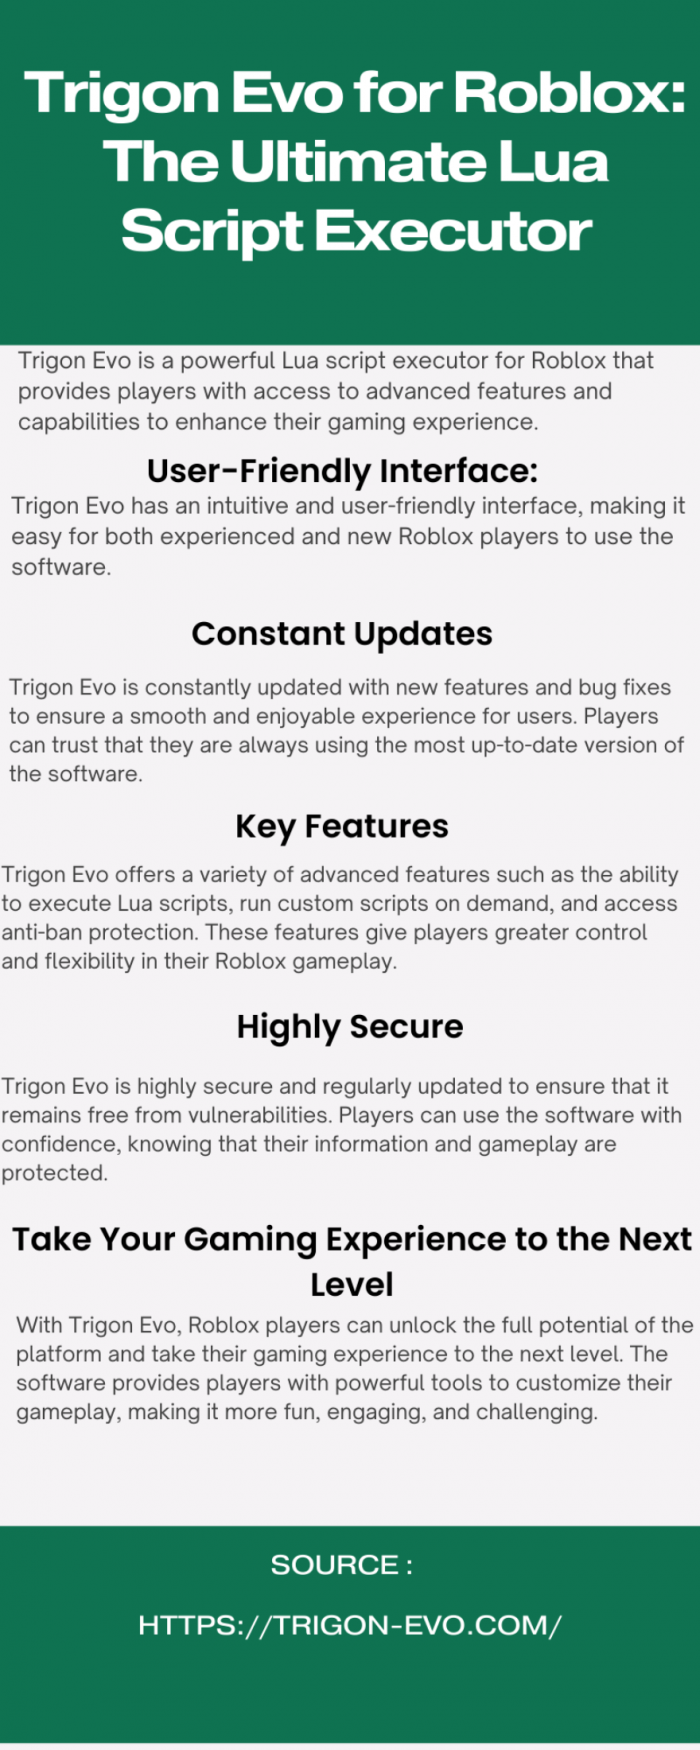 Trigon Evo: The Powerful Injector for Scripts and Cheats in Roblox